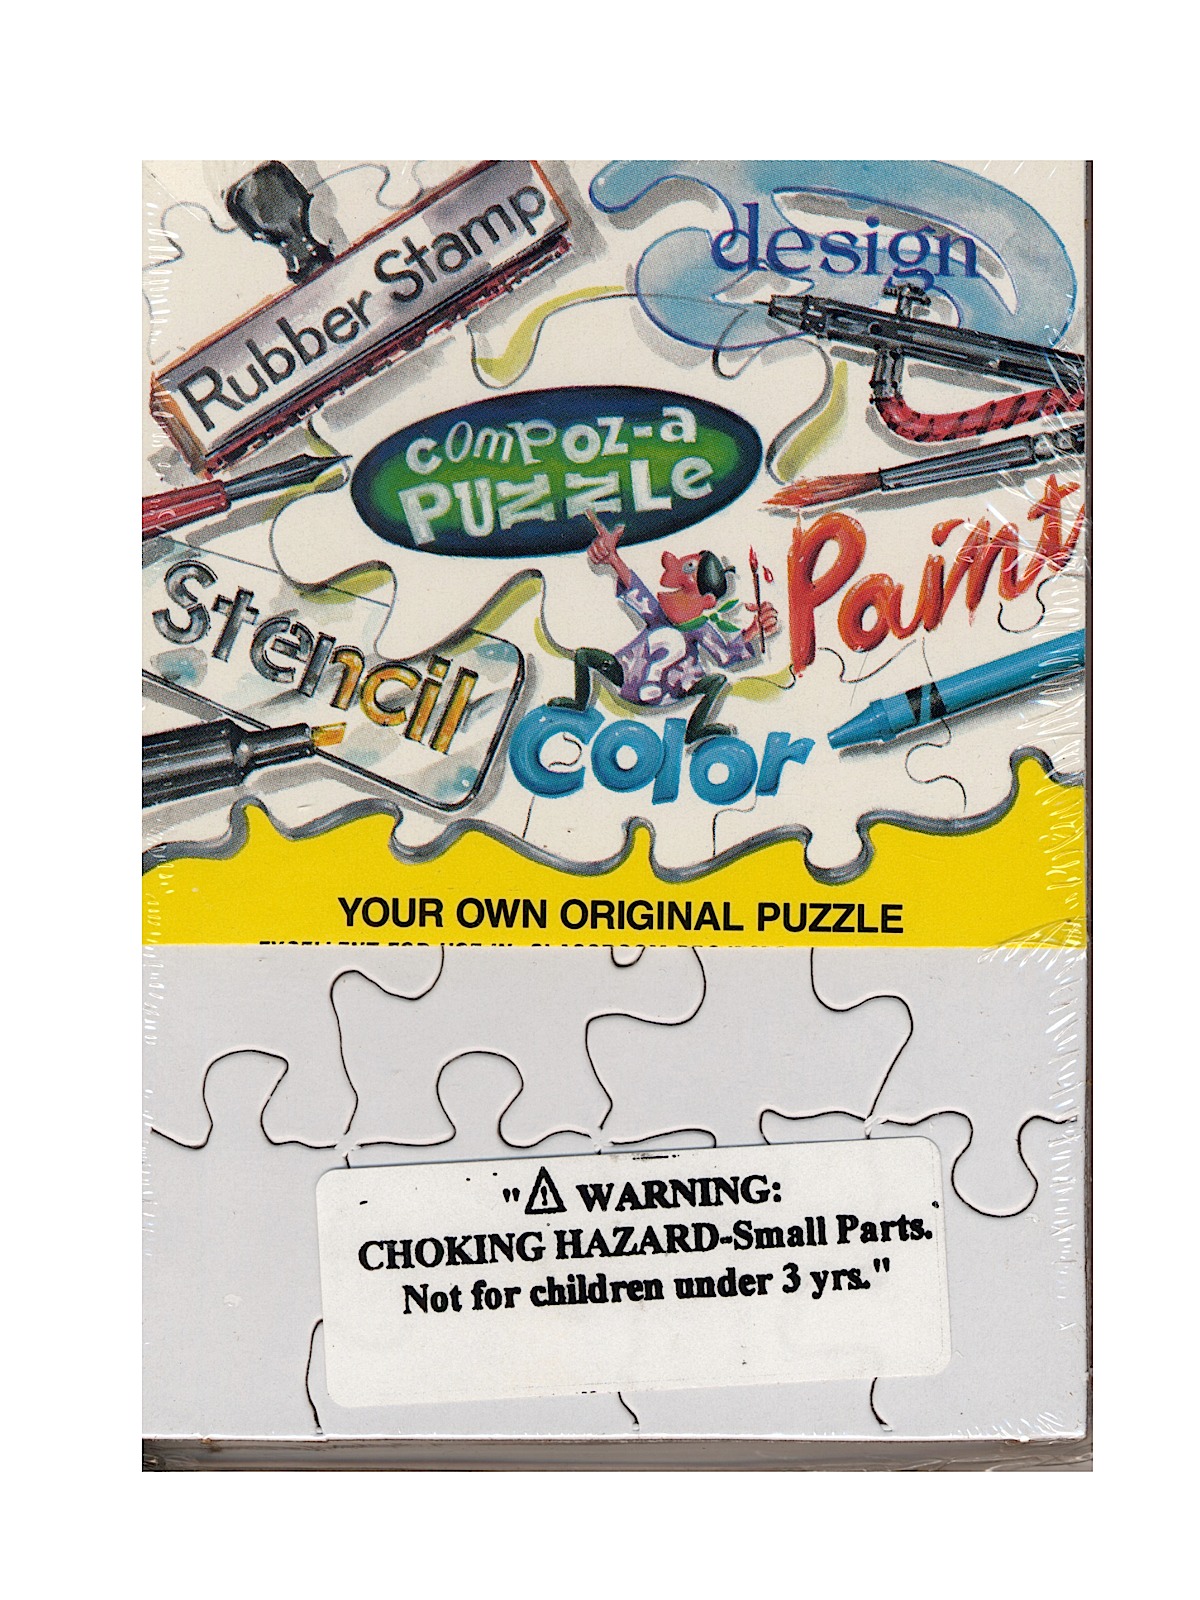 Blank Puzzles 4 In. X 5 1 2 In. 16 Pieces Each Pack Of 8